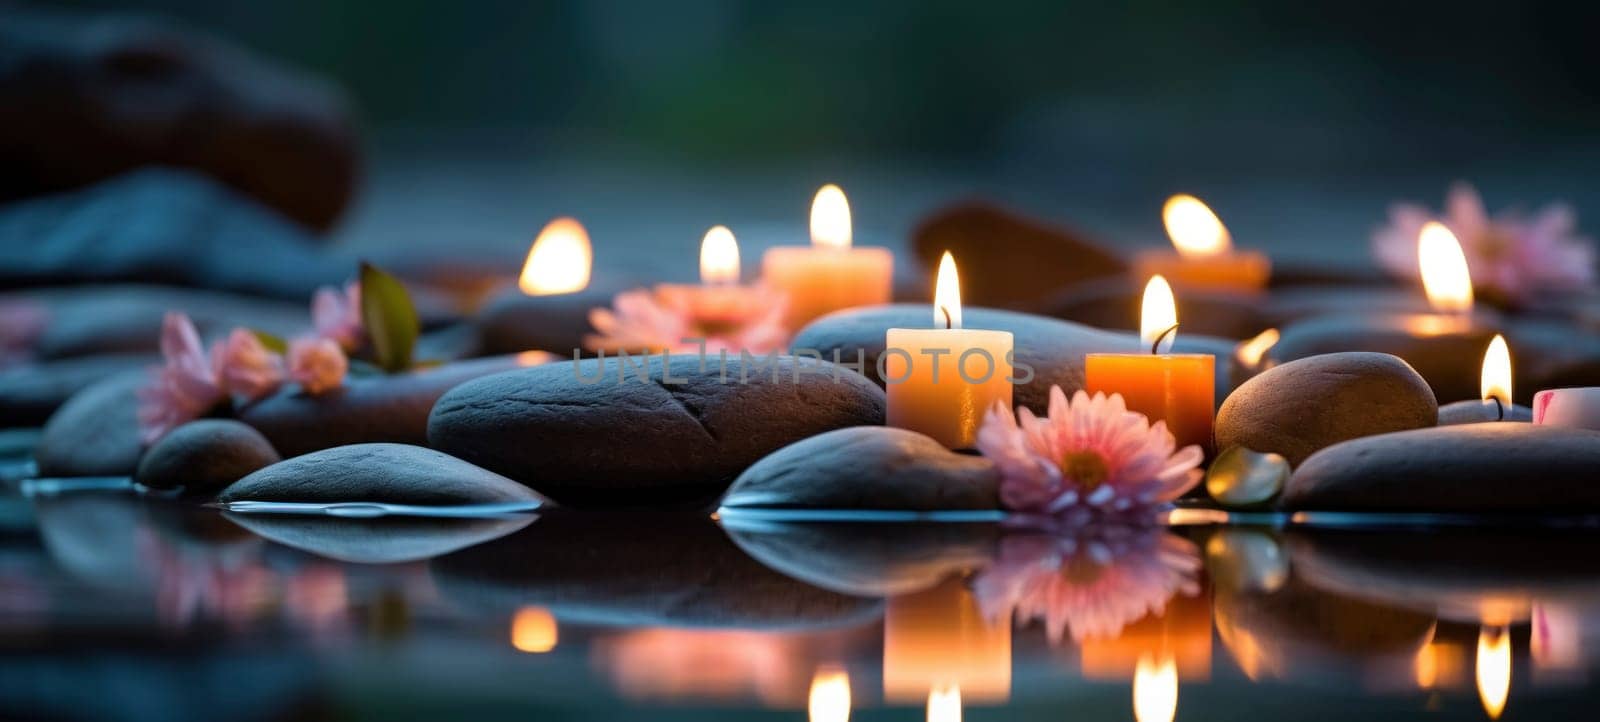 A serene spa ambiance with glowing candles, smooth stones, and delicate pink flowers reflected on water for a tranquil and meditative atmosphere.